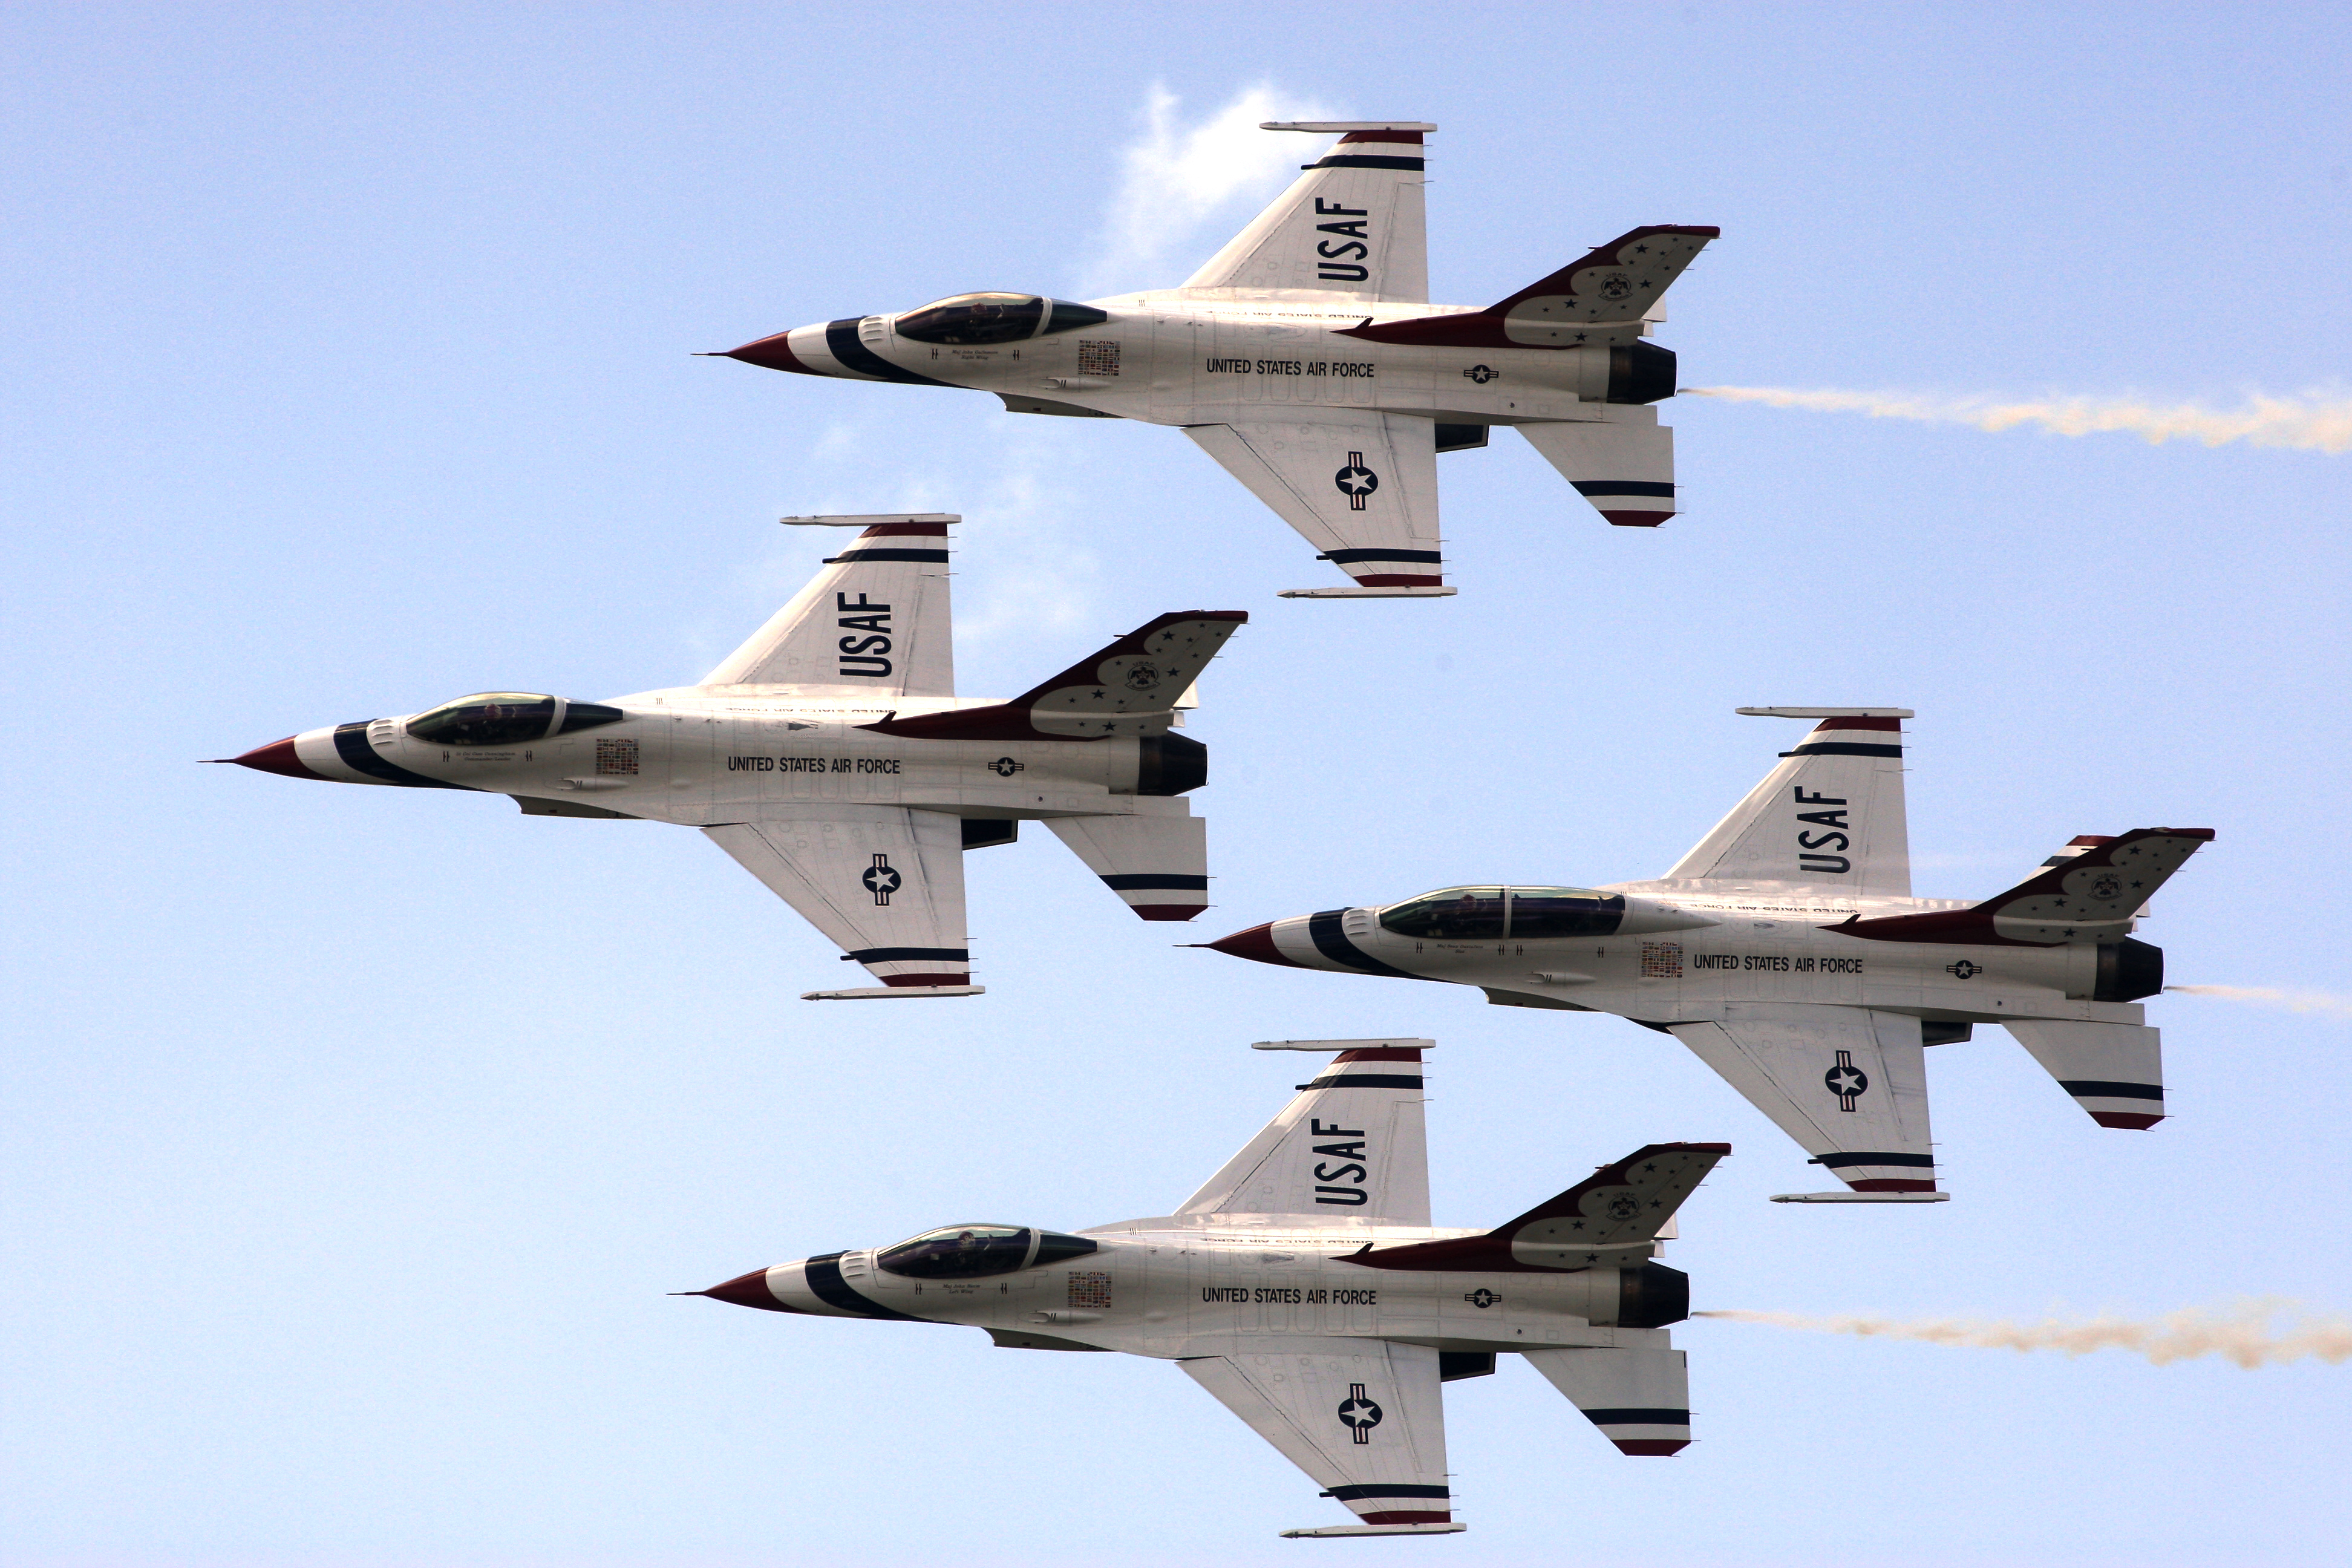 Going To The Fort Lauderdale Air Show This Weekend? Here’s What You Need To Know